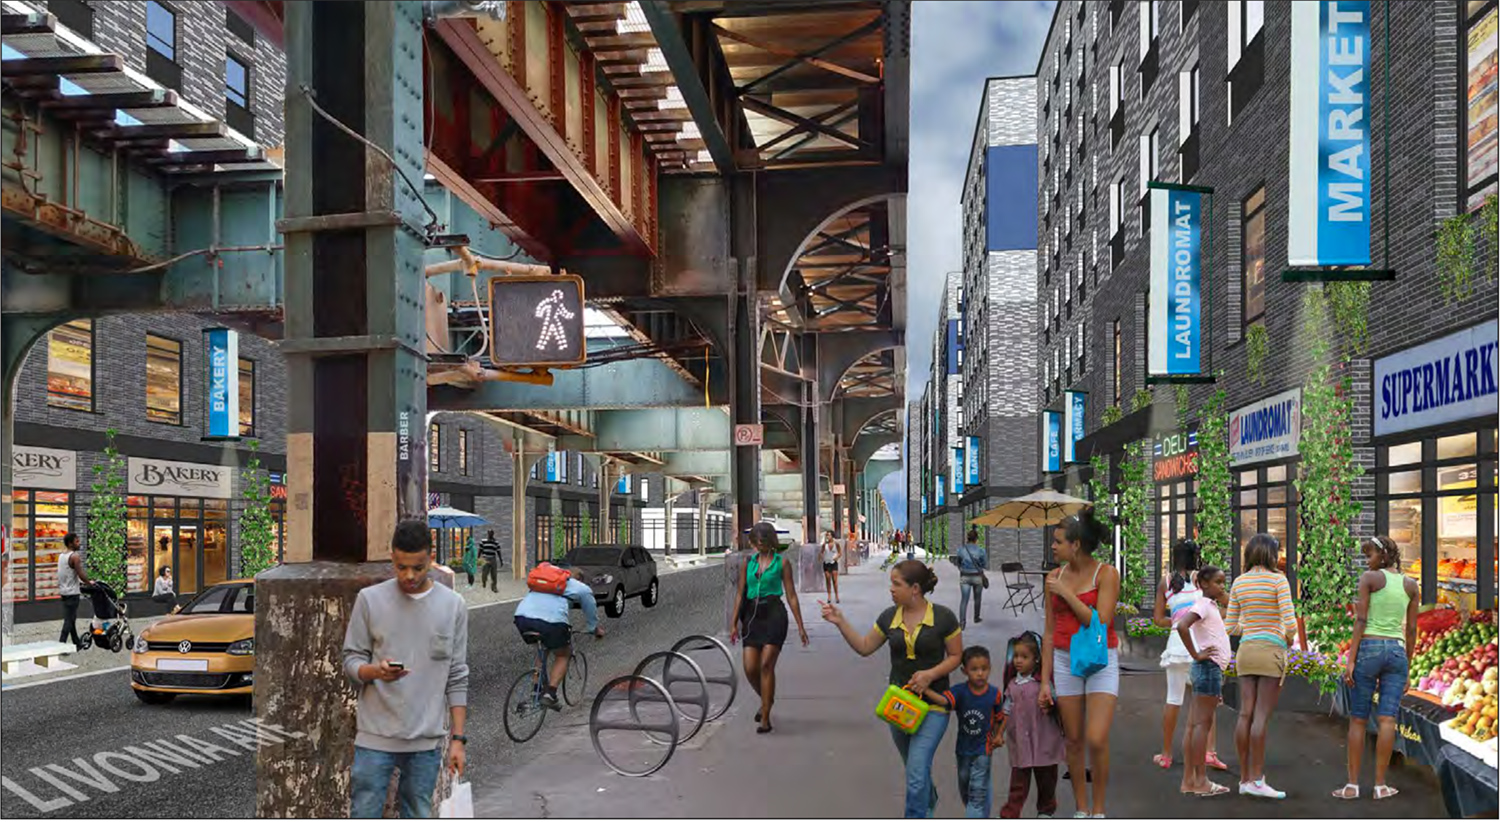 Rendering of street-level retail portions of the "Marcus Garvey Extension" development in Brownsville, Brooklyn